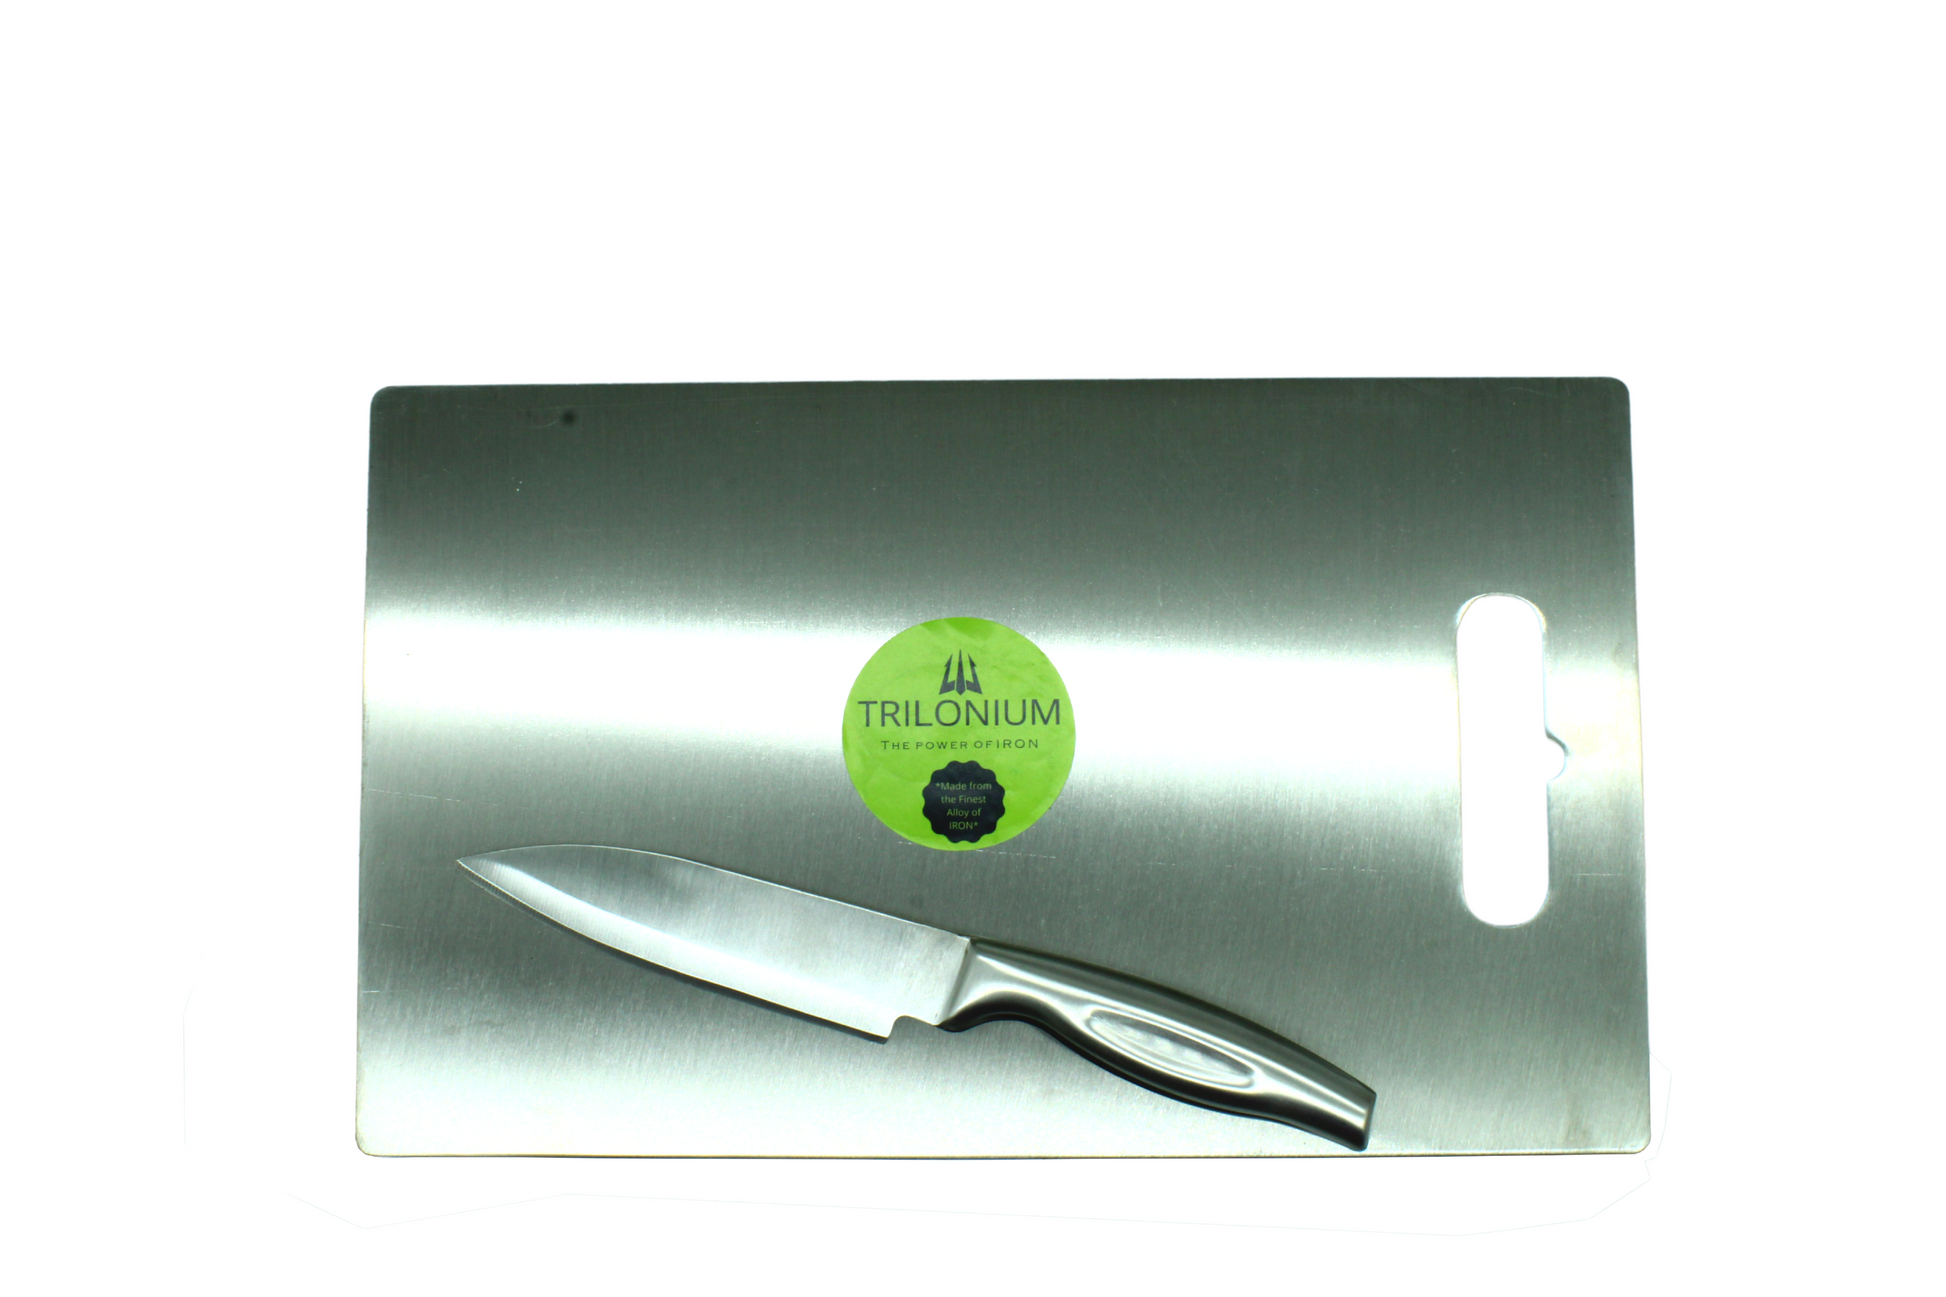 Stainless Steel Chopping | Cutting Board | Size No: 3 - 39cm X 26cm | Thickness: 2mm + 1 Pcs Knife | Combo TRILONIUM | Cast Iron Cookware